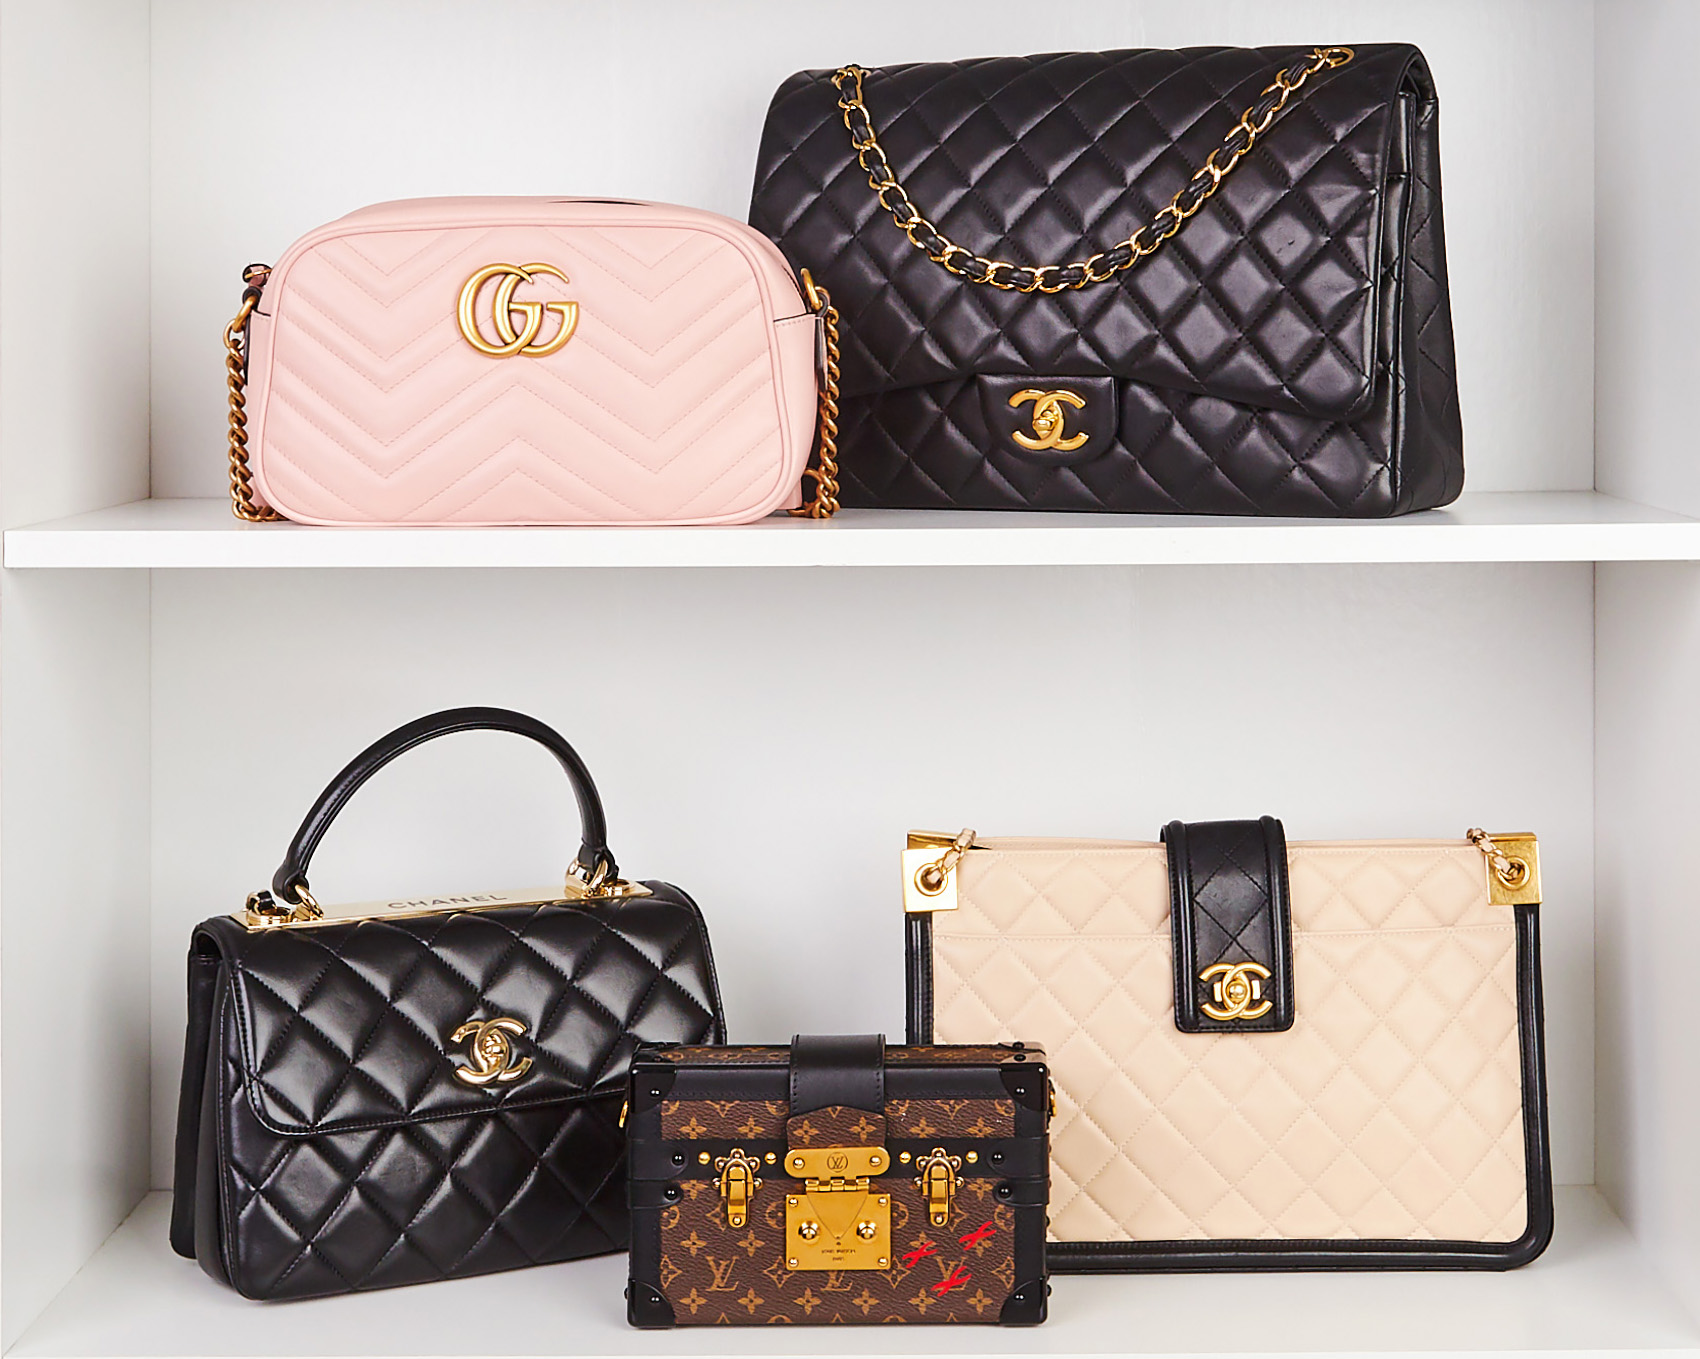 Make money by consigning your designer handbags! | Yoogi's Closet Authenticated Pre-Owned Luxury yoogiscloset.com #louisvuitton #gucci #chanel #designerhandbags